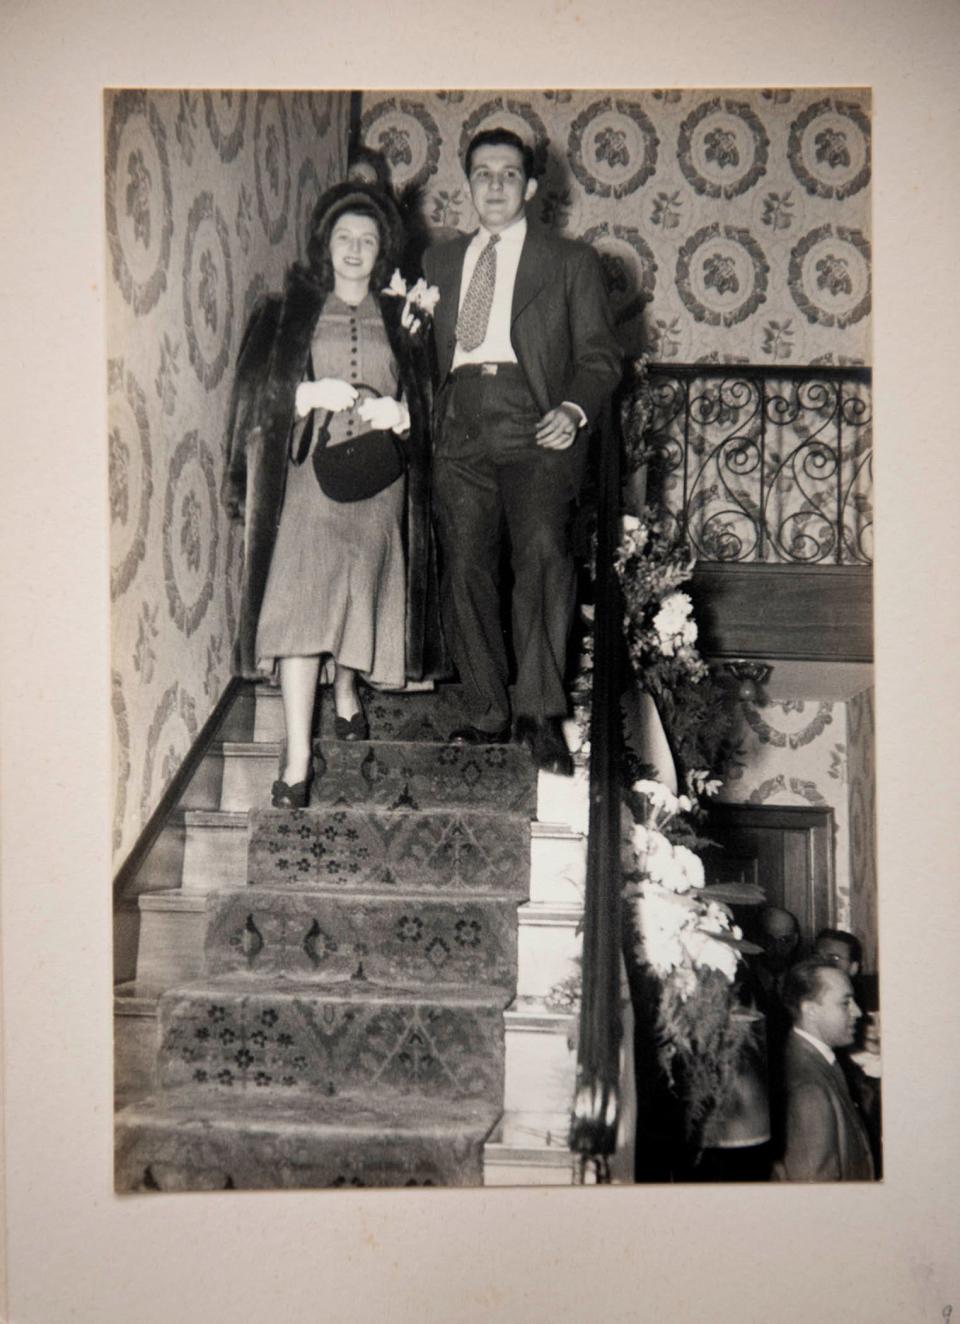 Blanche and Ralph Del Deo on their wedding day in Sidney, Ohio, on Nov. 29, 1947. Photo provided by Ralph and Blanche Del Deo